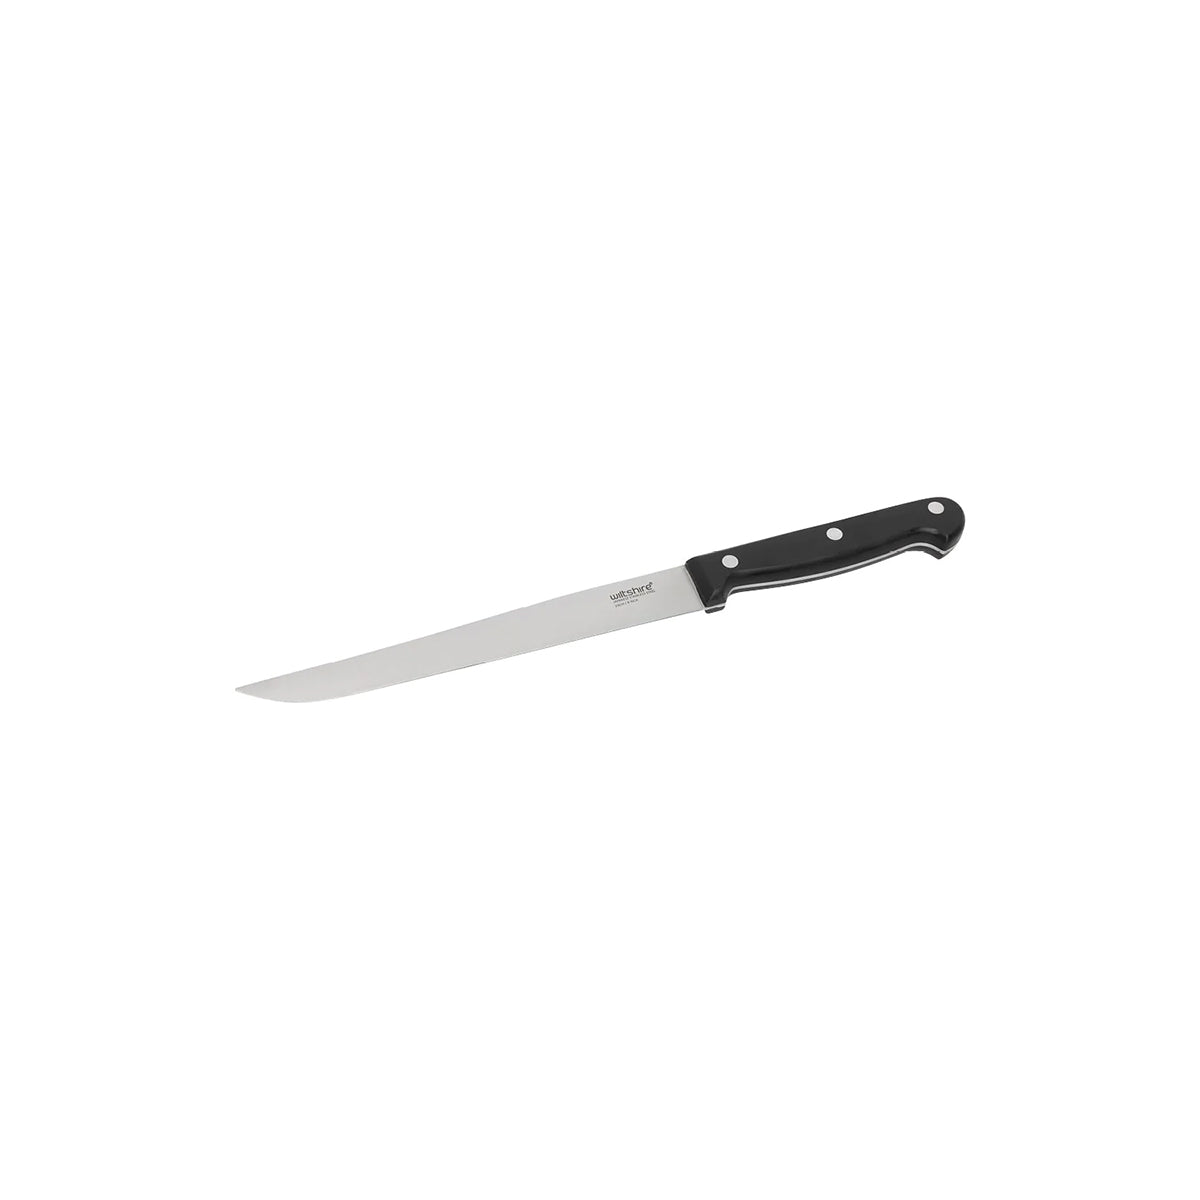 WLT41324 WILTSHIRE Classic Carving Knife 200mm Tomkin Australia Hospitality Supplies